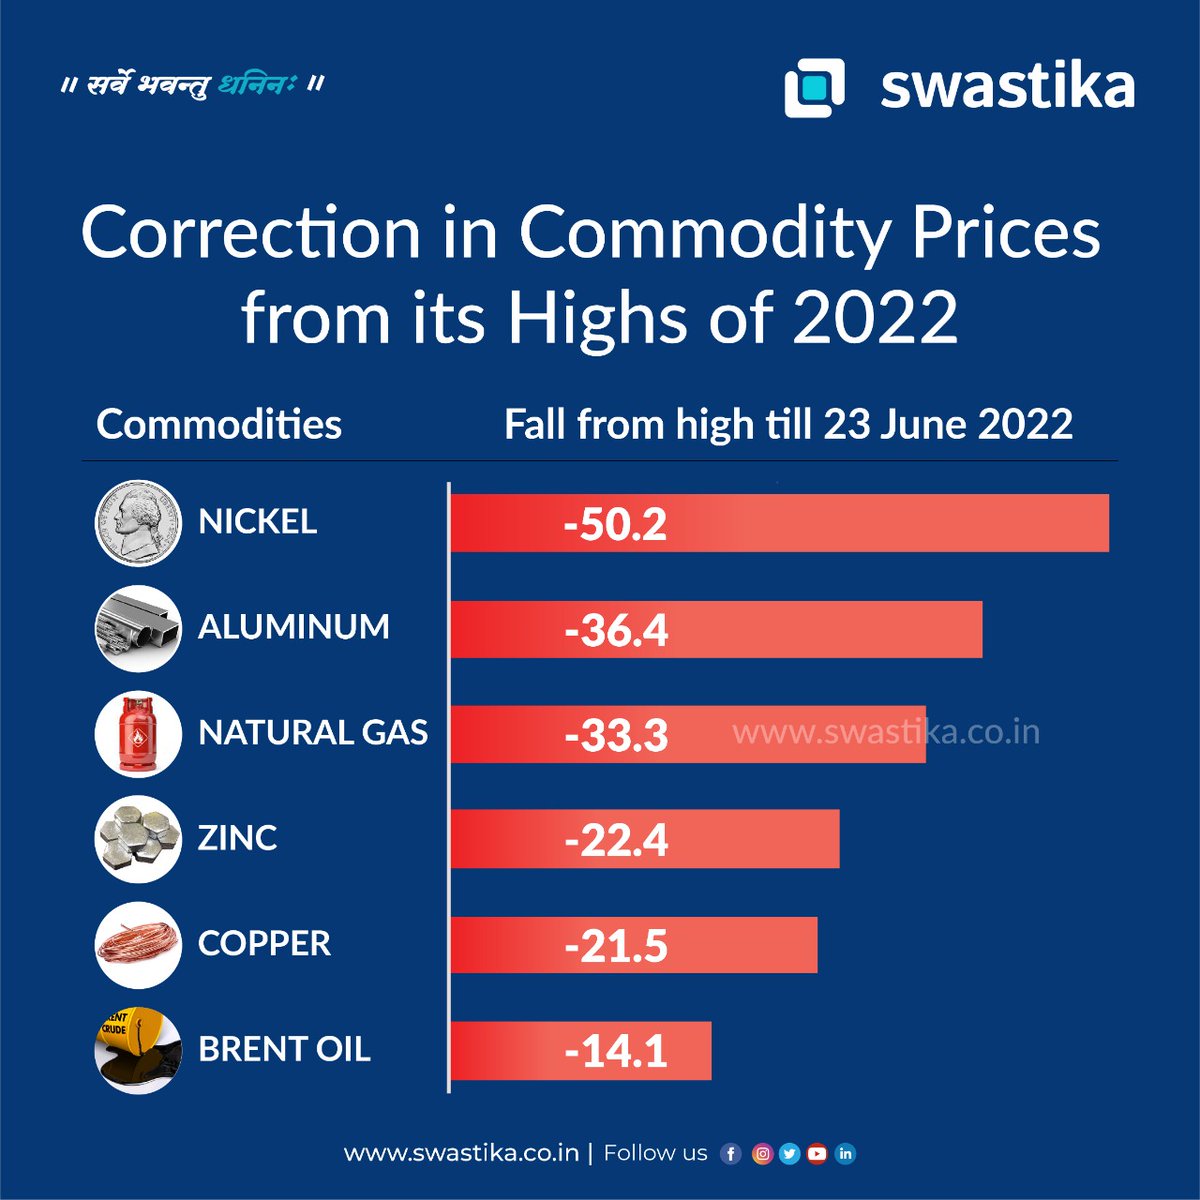 Correction in Commodity Prices from its Highs of 2022!

📞0120-4400789
🌐 swastika.co.in

#Commodities #goldrate #NCDEX #MCX #Crudeoil #silver #brentoil #commoditytradingbasics #commoditynews 
#commodityprices #edibleoils #metals #commodityfutures #Swastika